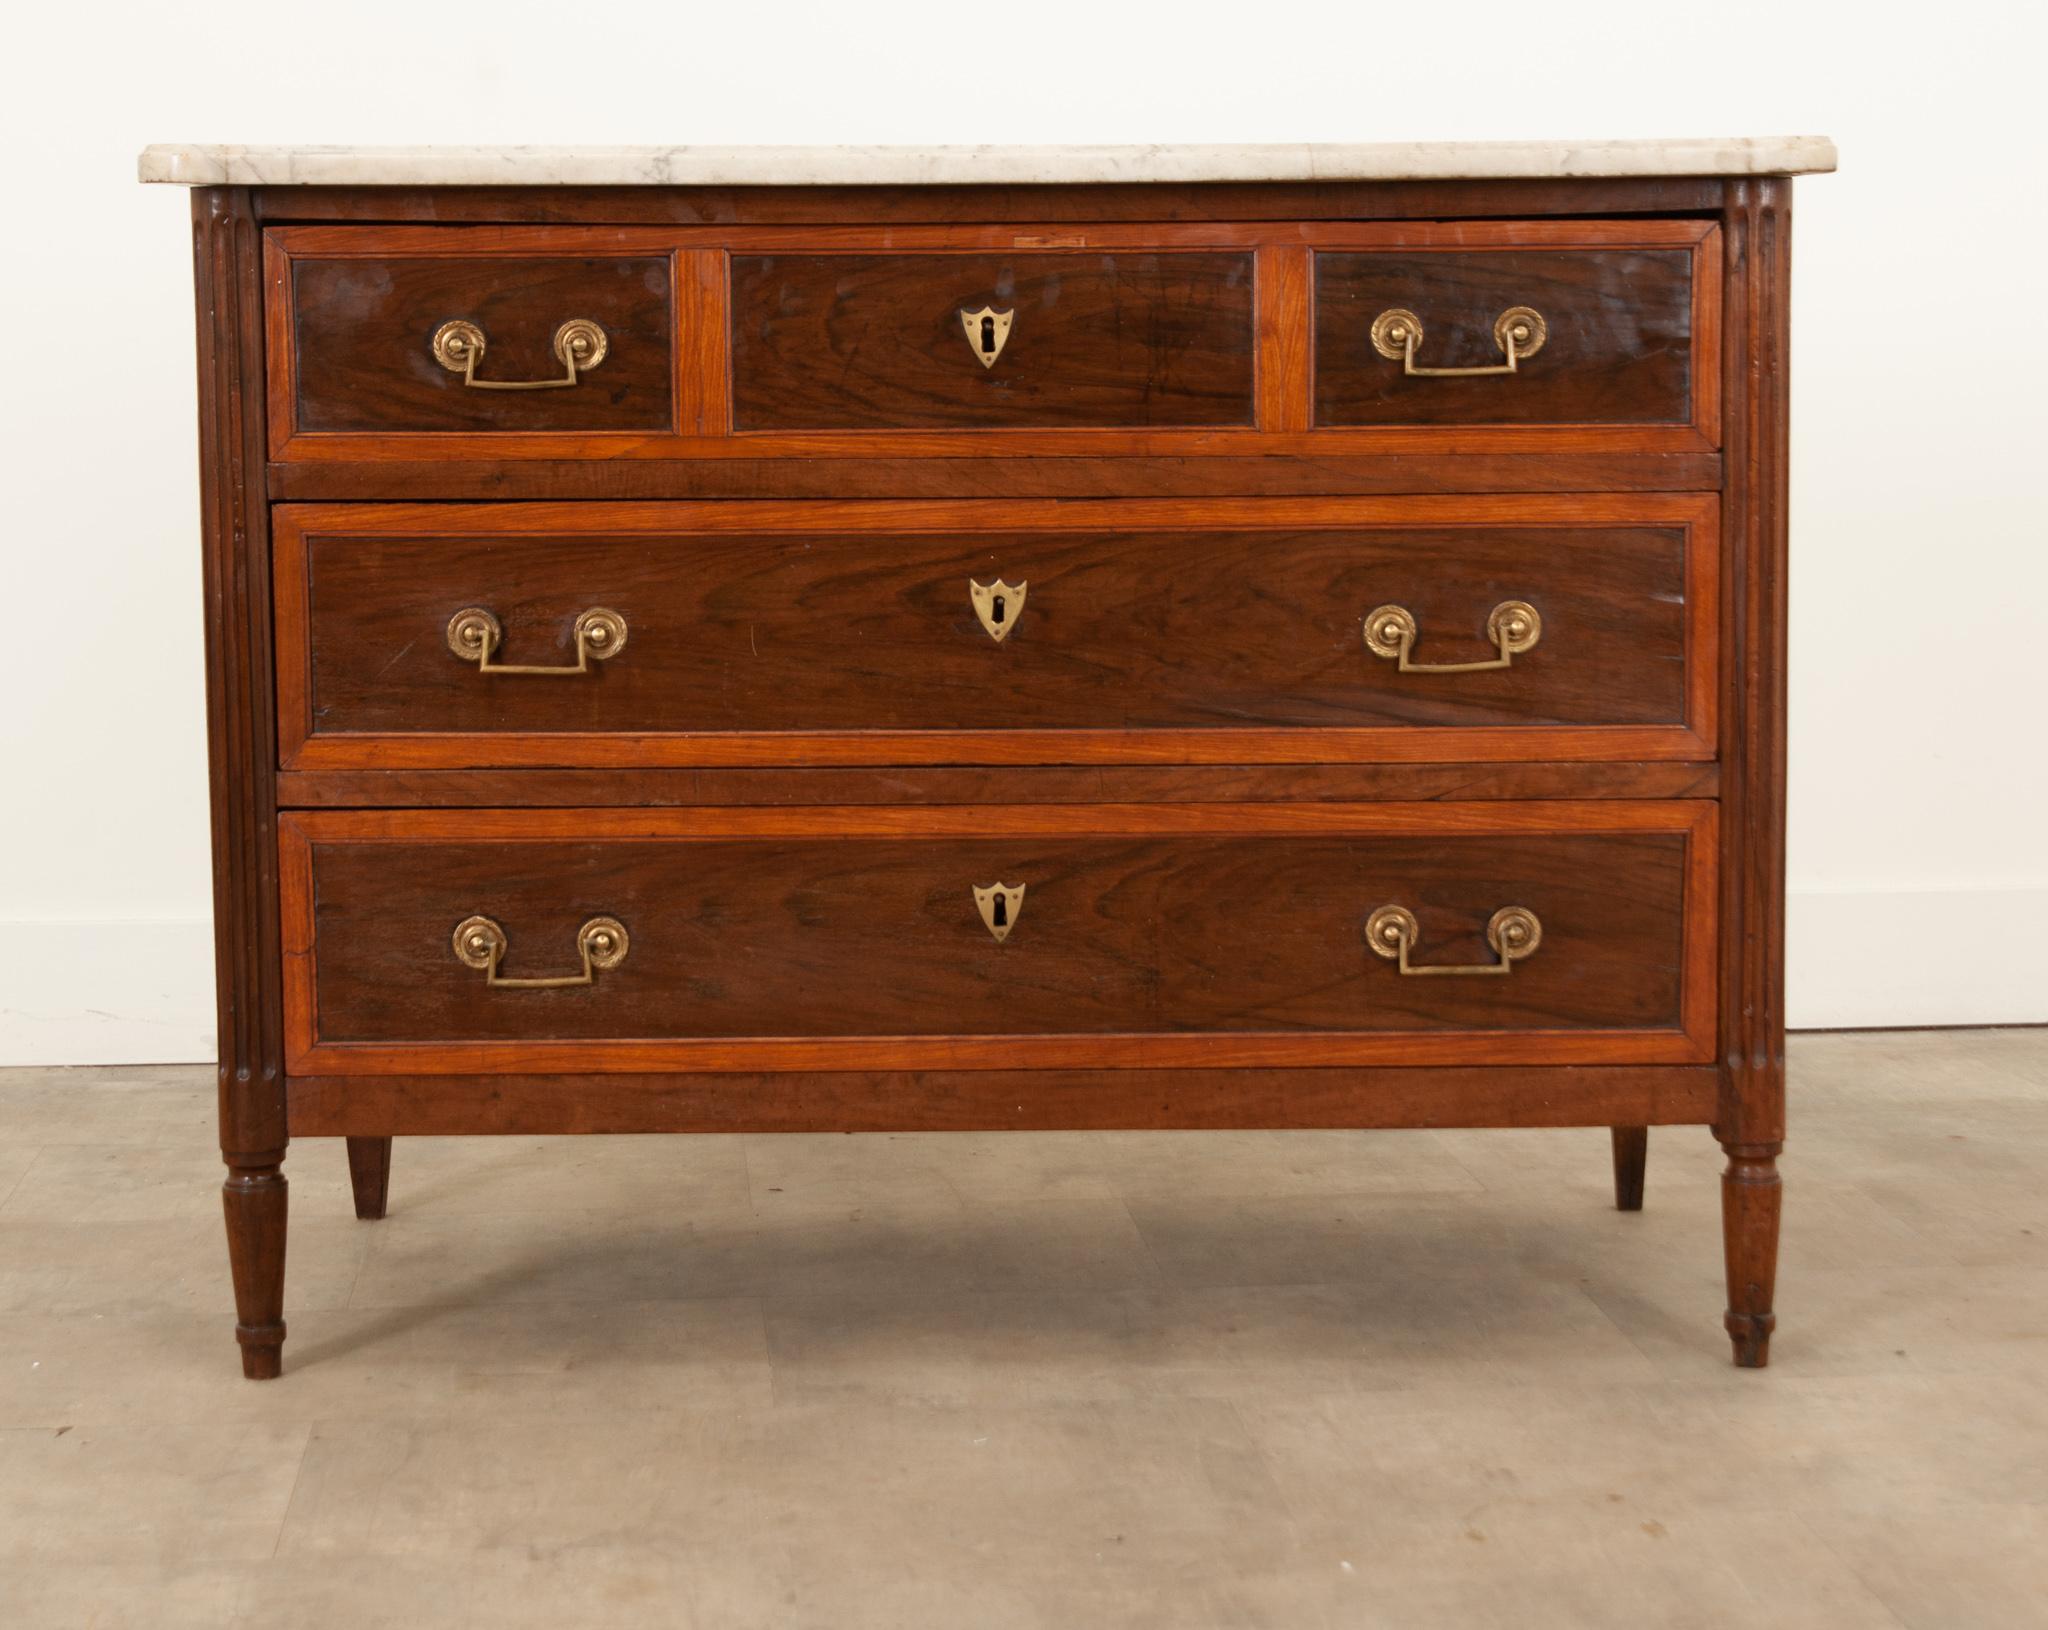 A fine French 19th Century Louis XVI style commode made of beautiful mahogany. Hand-crafted in France circa 1840, its original shaped marble top with beautiful colors and patterns throughout sits over three wide drawers decorated with lustrous brass